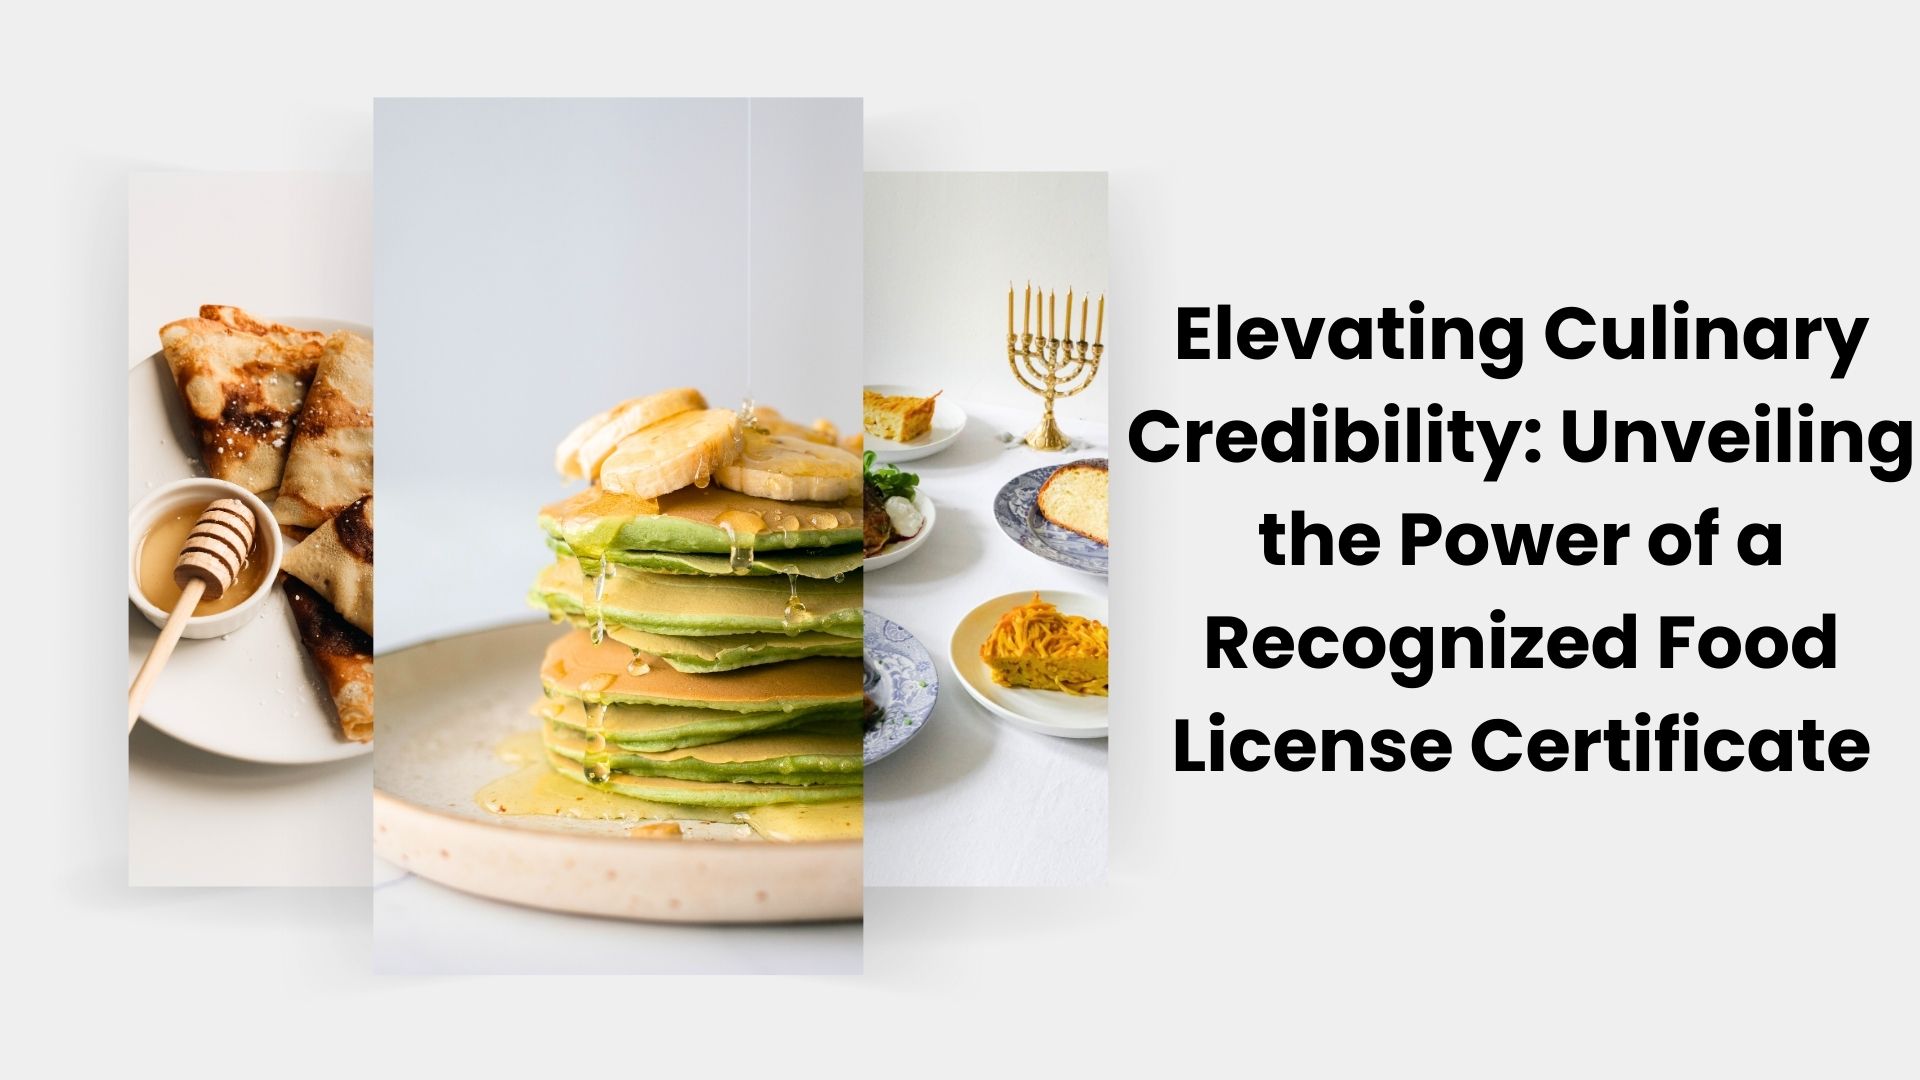 Elevating Culinary Credibility: Unveiling the Power of a Recognized Food License Certificate